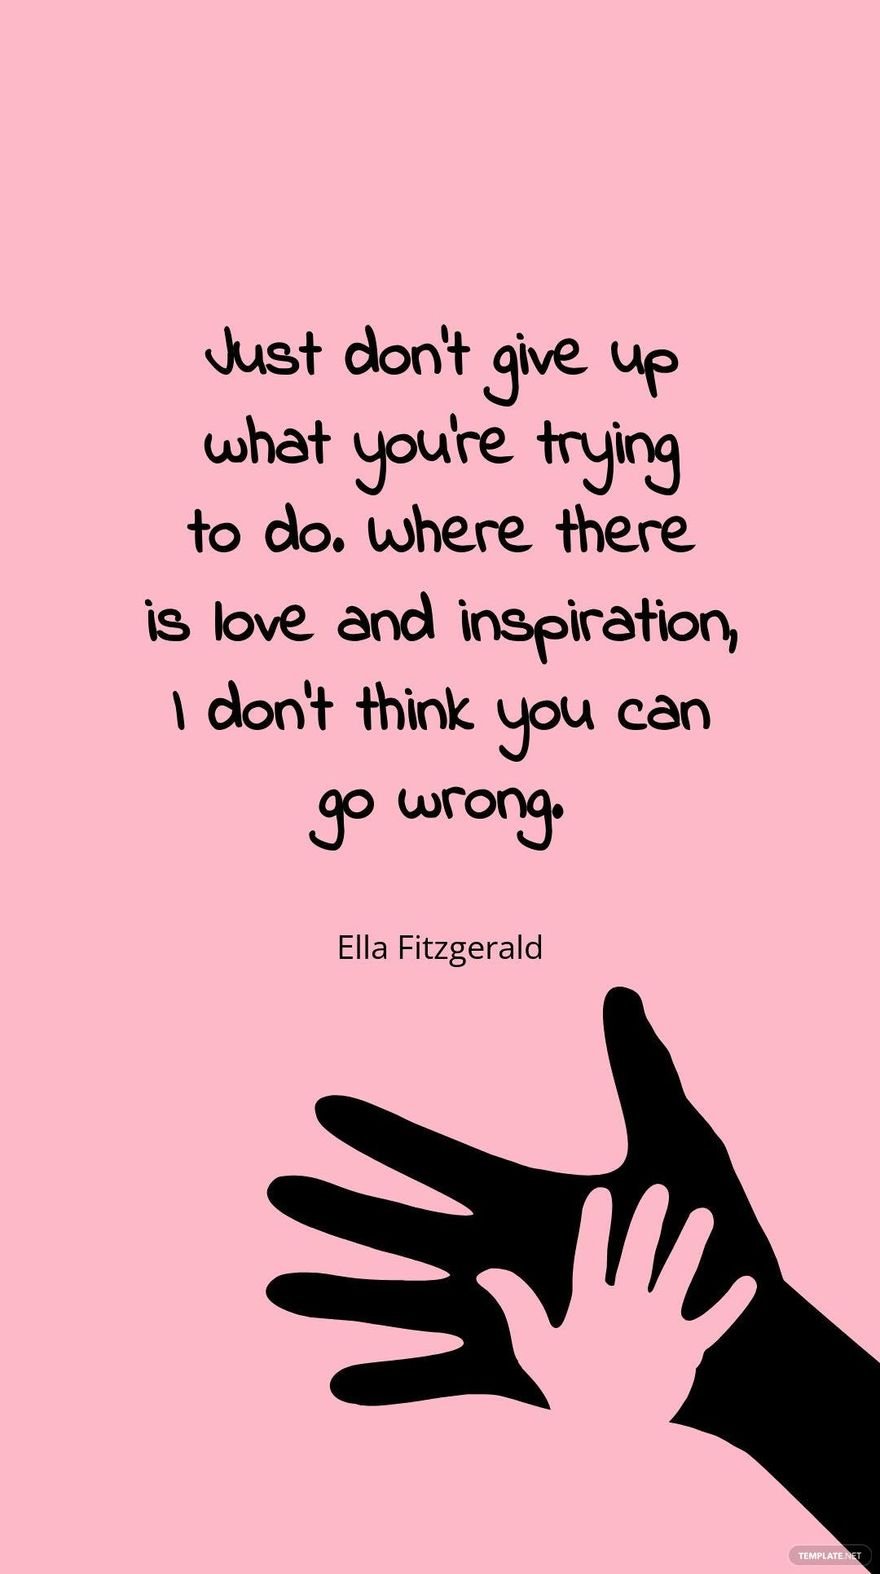 Ella Fitzgerald - Just don't give up what you're trying to do. Where there is love and inspiration, I don't think you can go wrong.